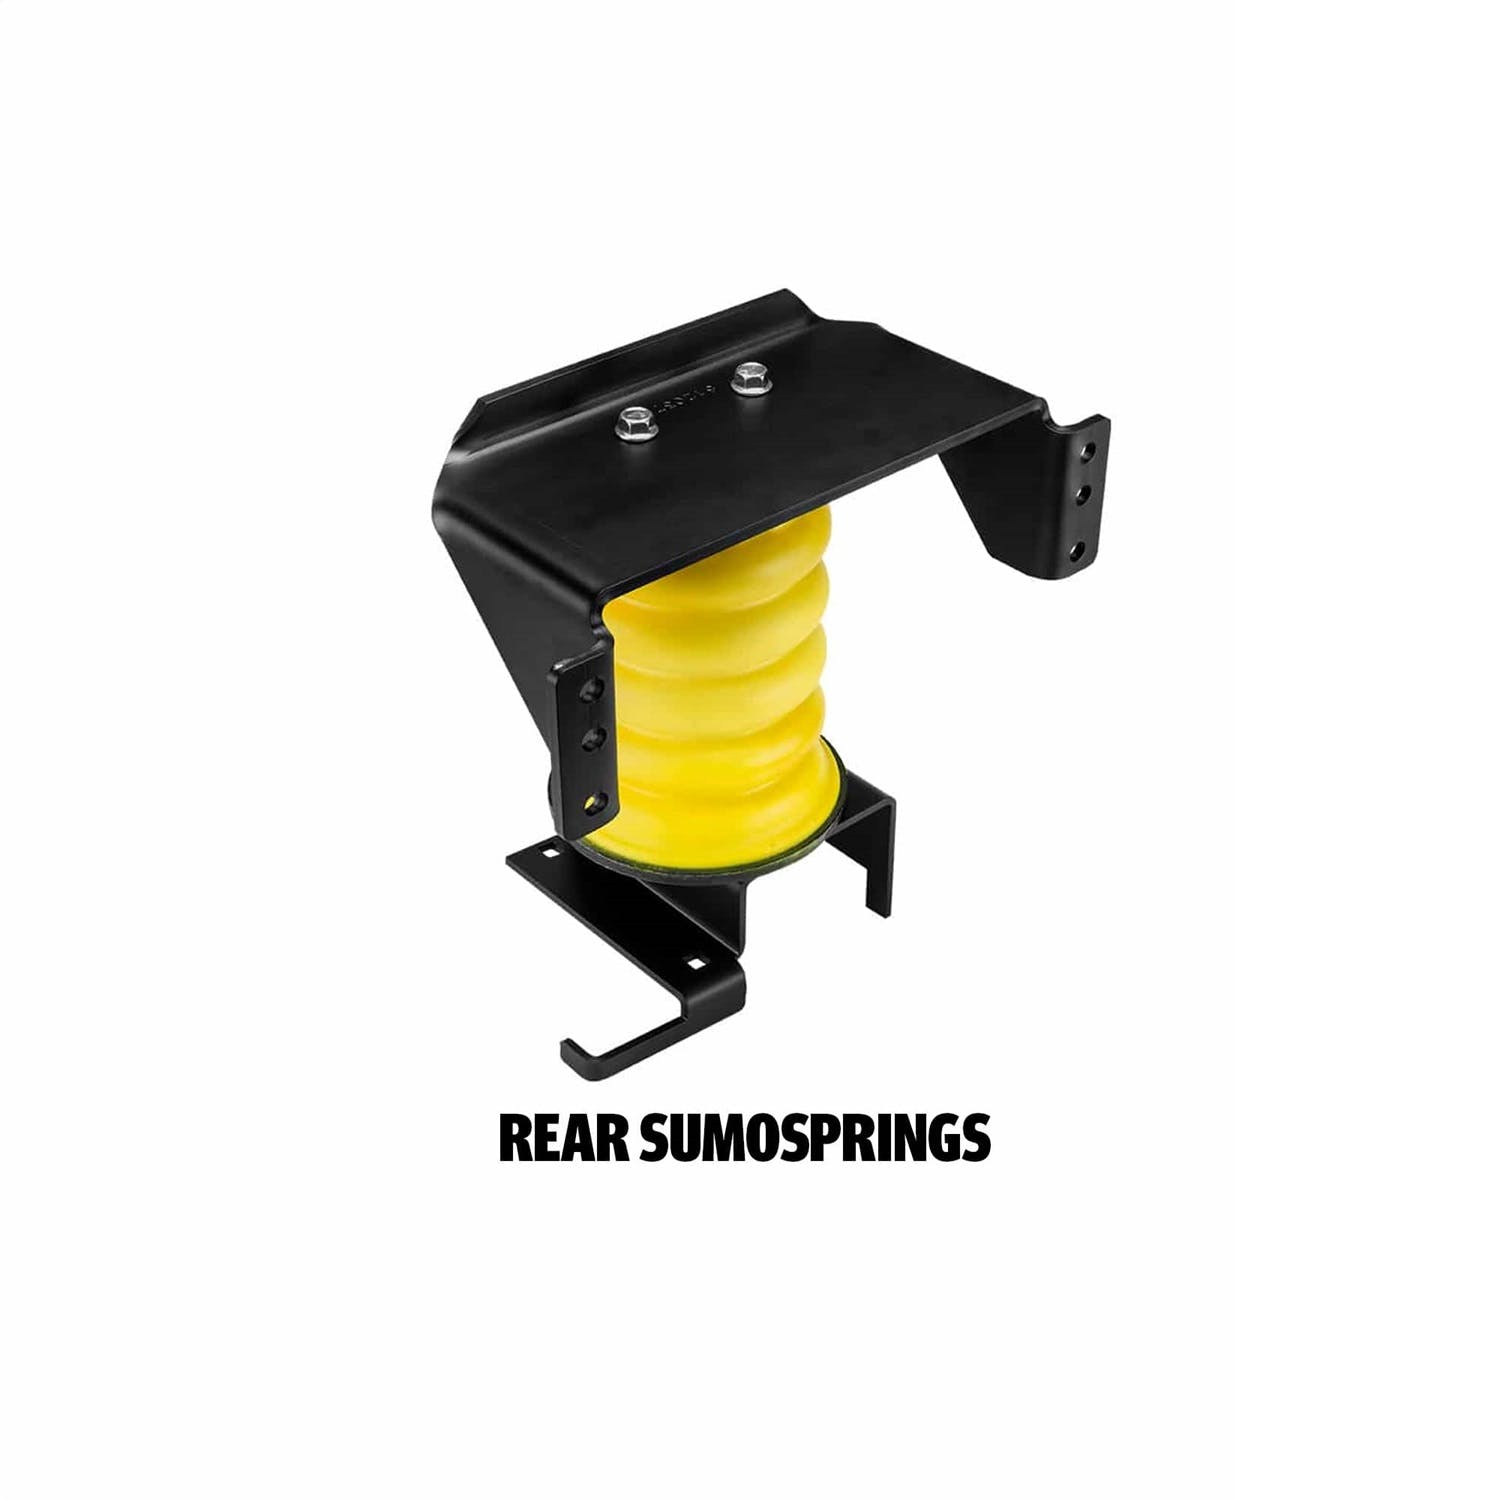 SuperSprings K-10-005 SumoSprings Front and Rear Kits are one-piece units attached on each side